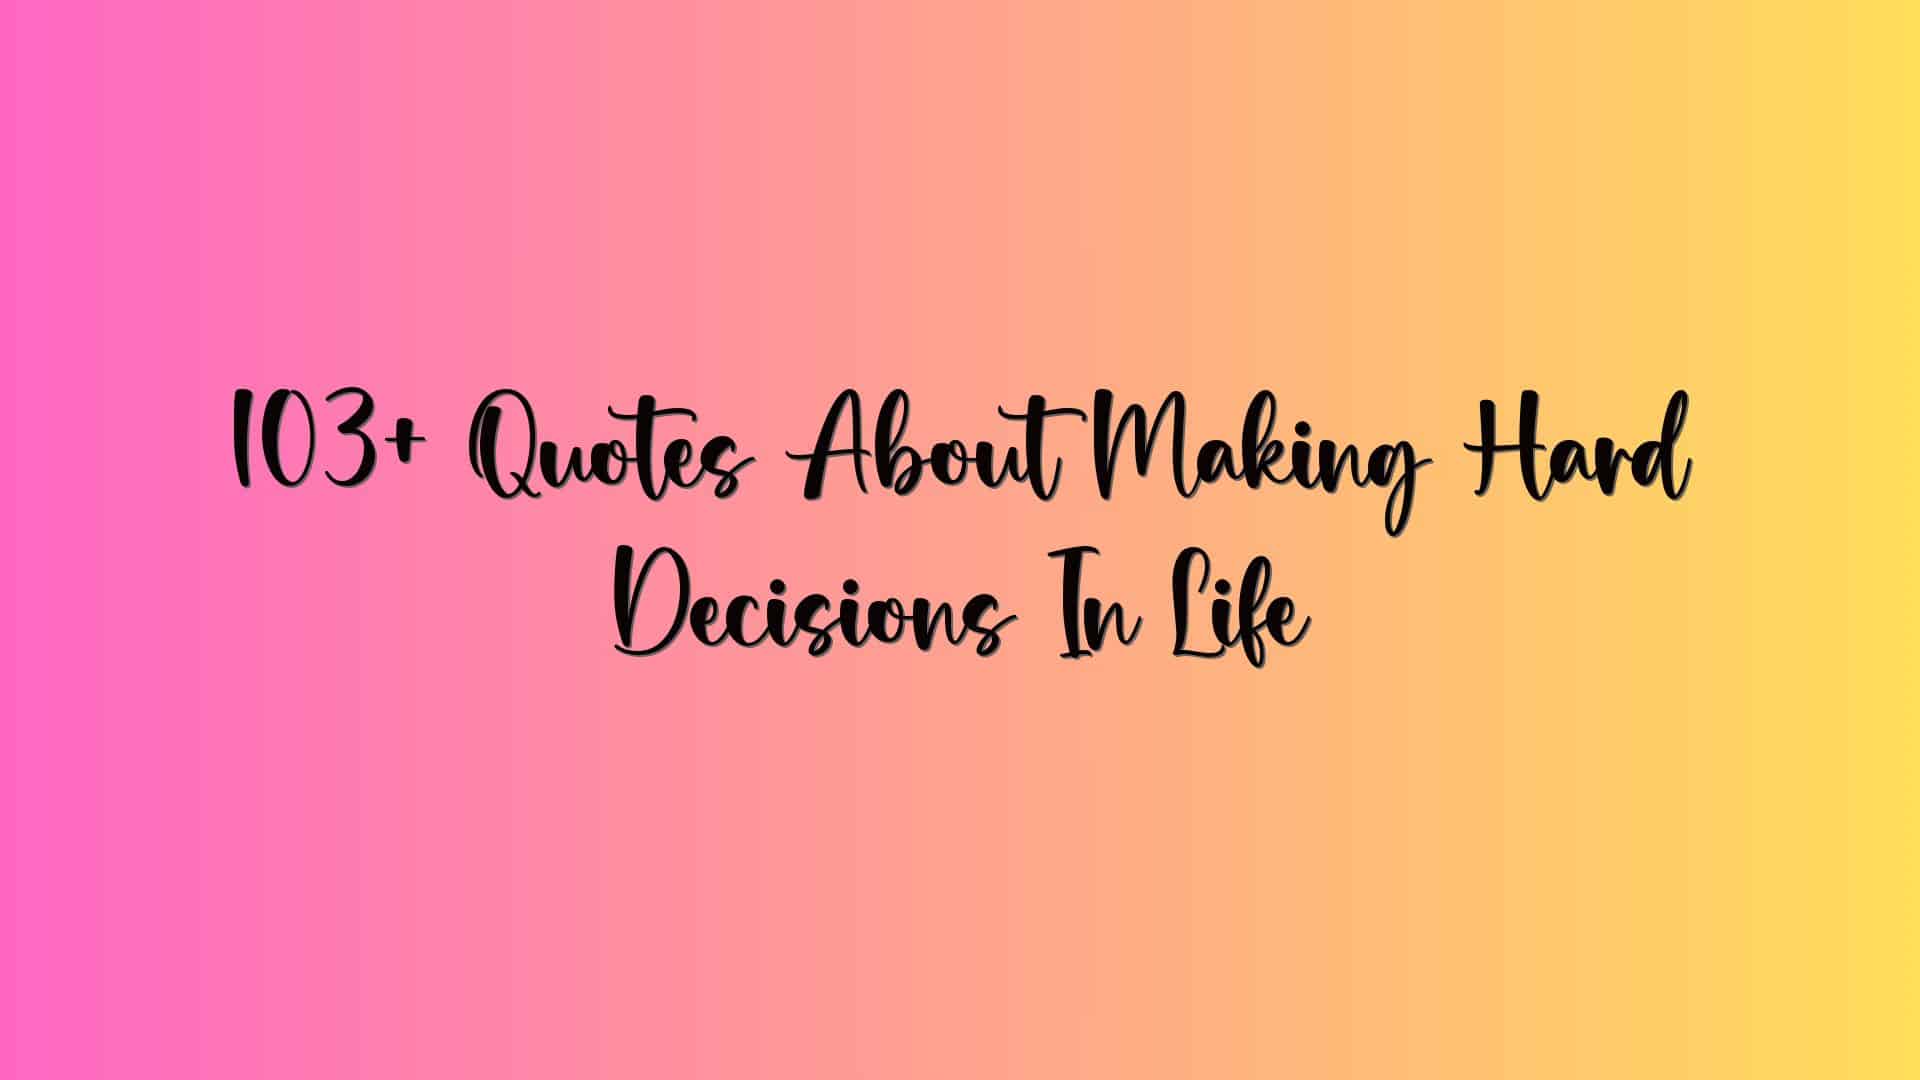 103+ Quotes About Making Hard Decisions In Life